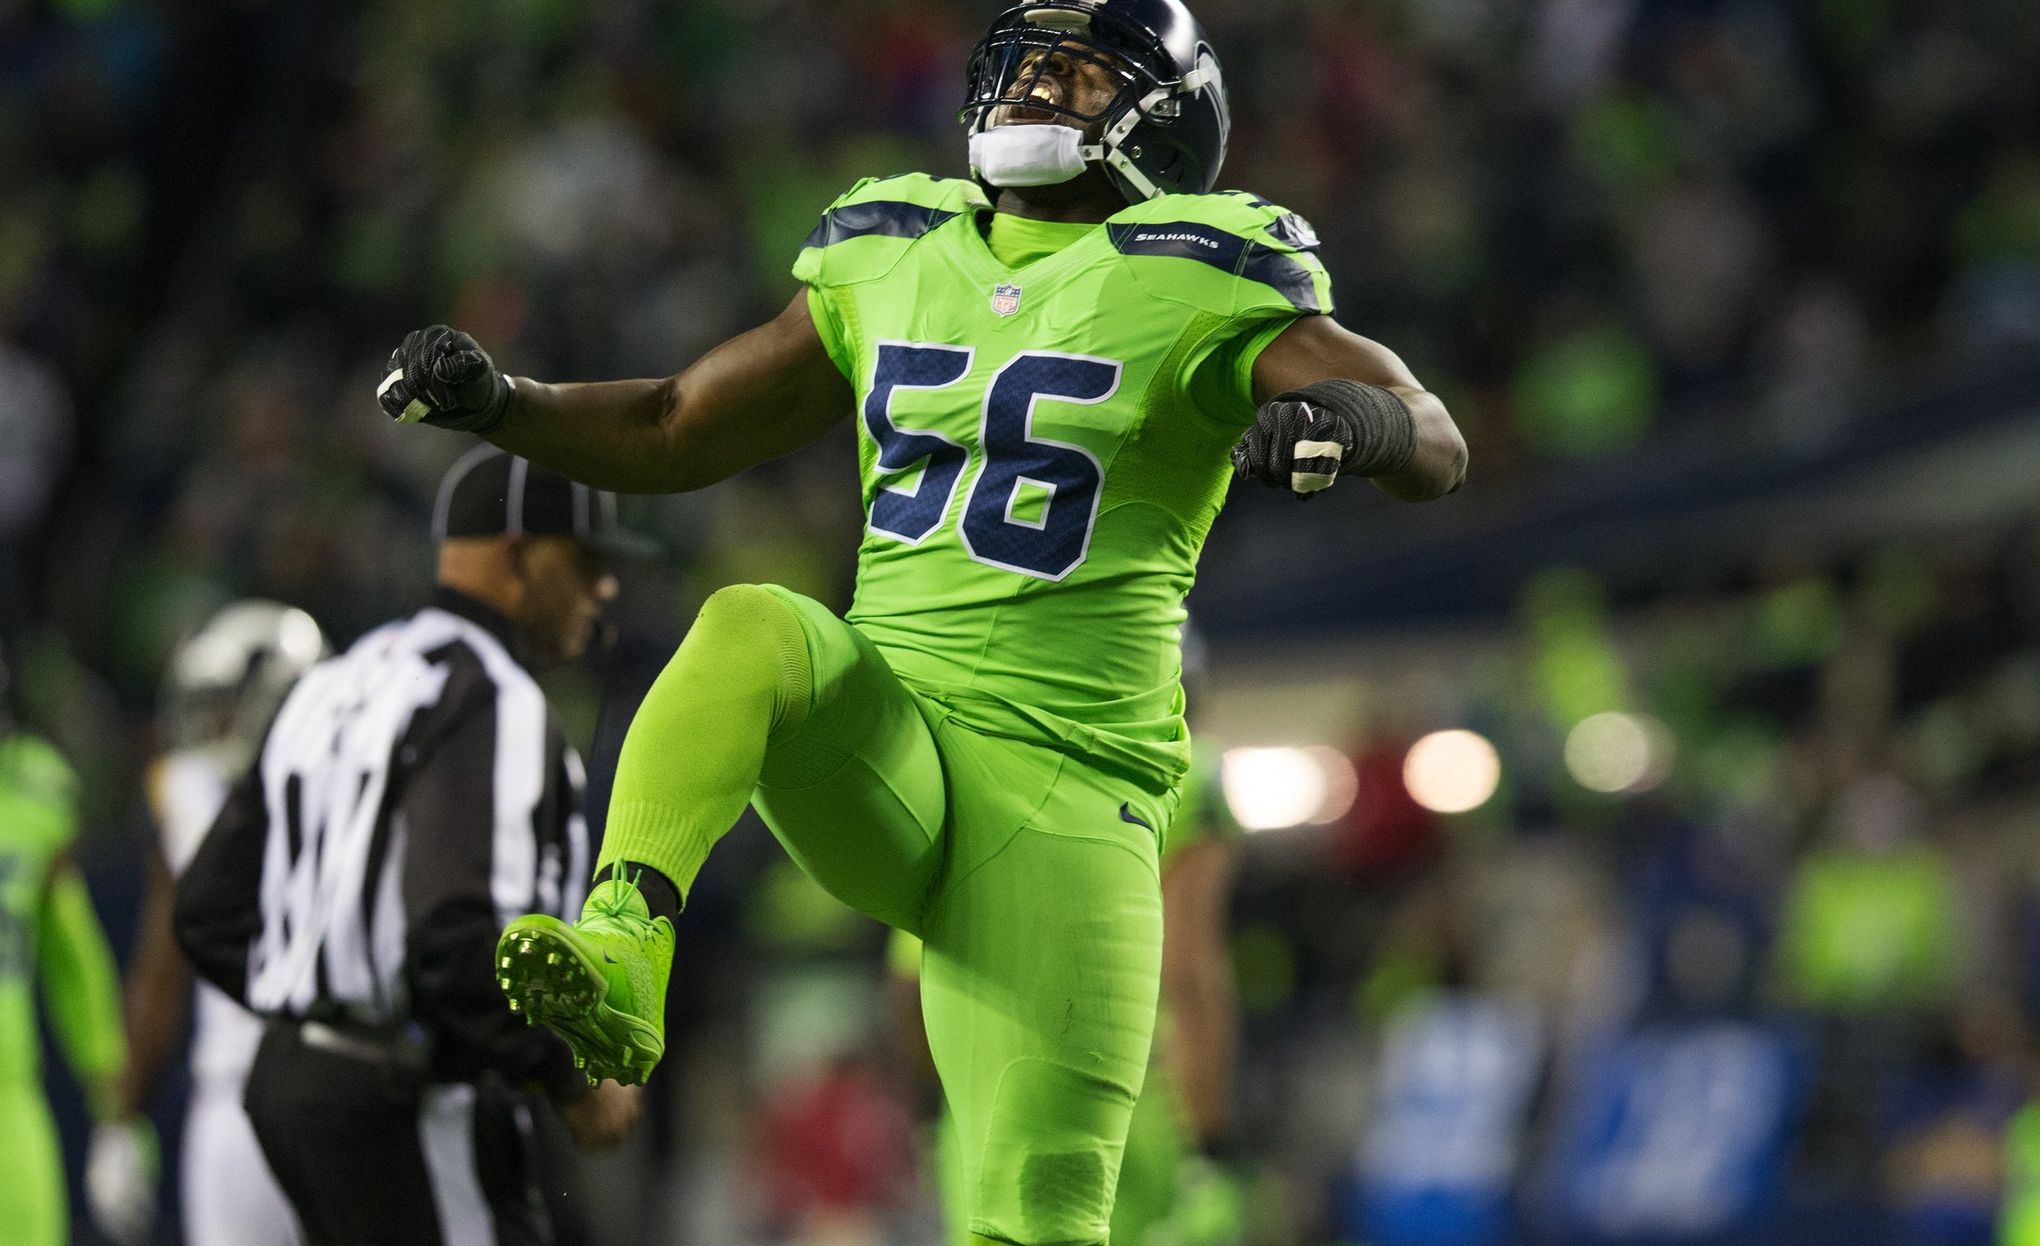 Cliff Avril second Seahawk on NFL Network's Top 100 list